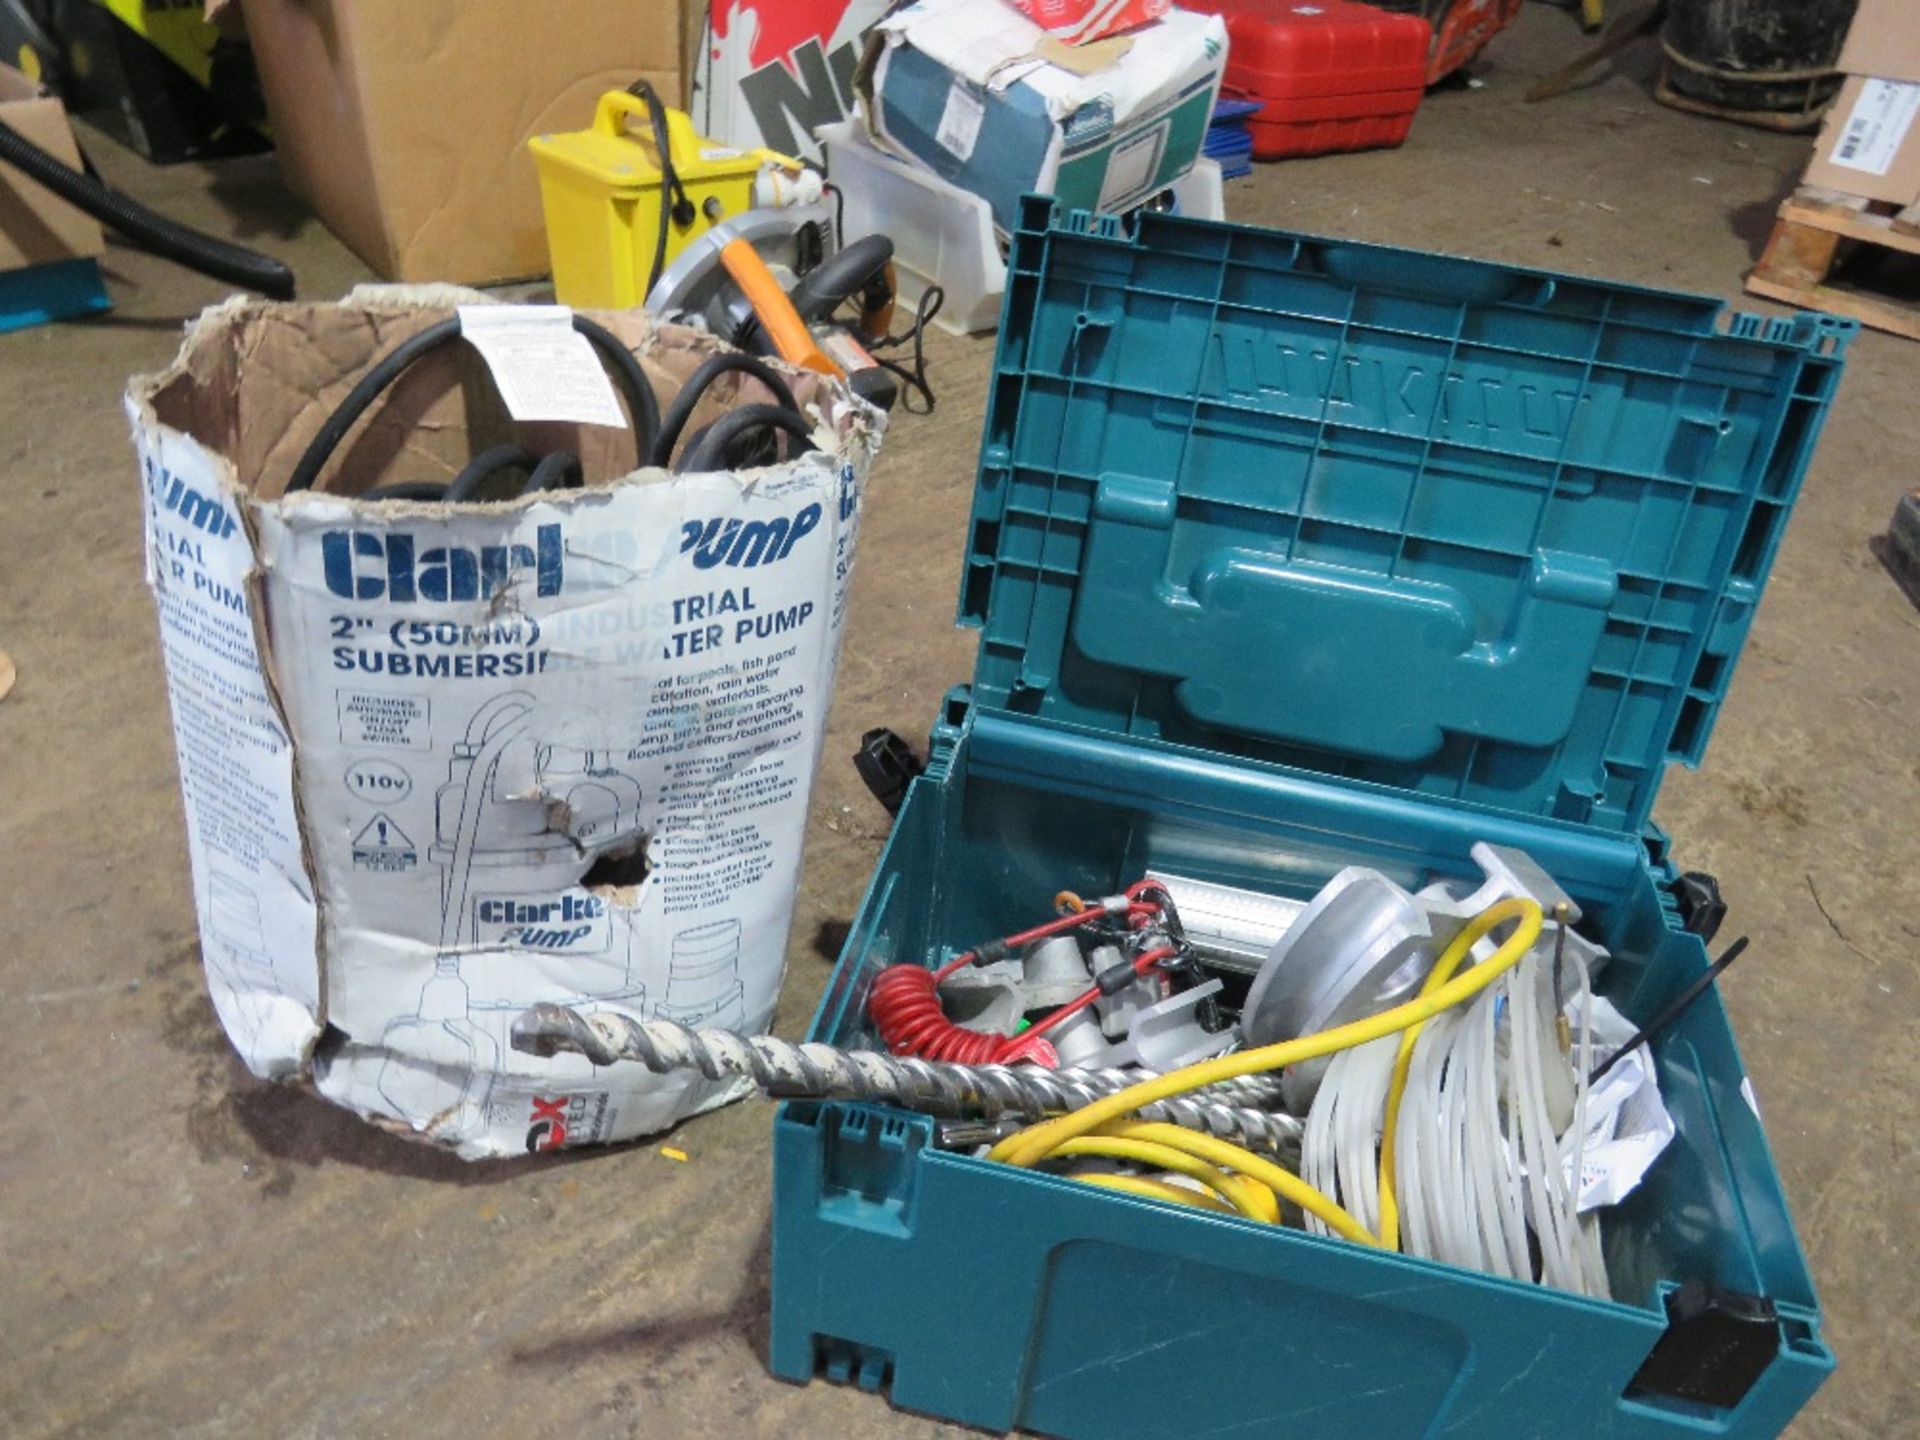 SUBMERSIBLE PUMP 110V AND BAG OF SUNDRIES. - Image 2 of 5